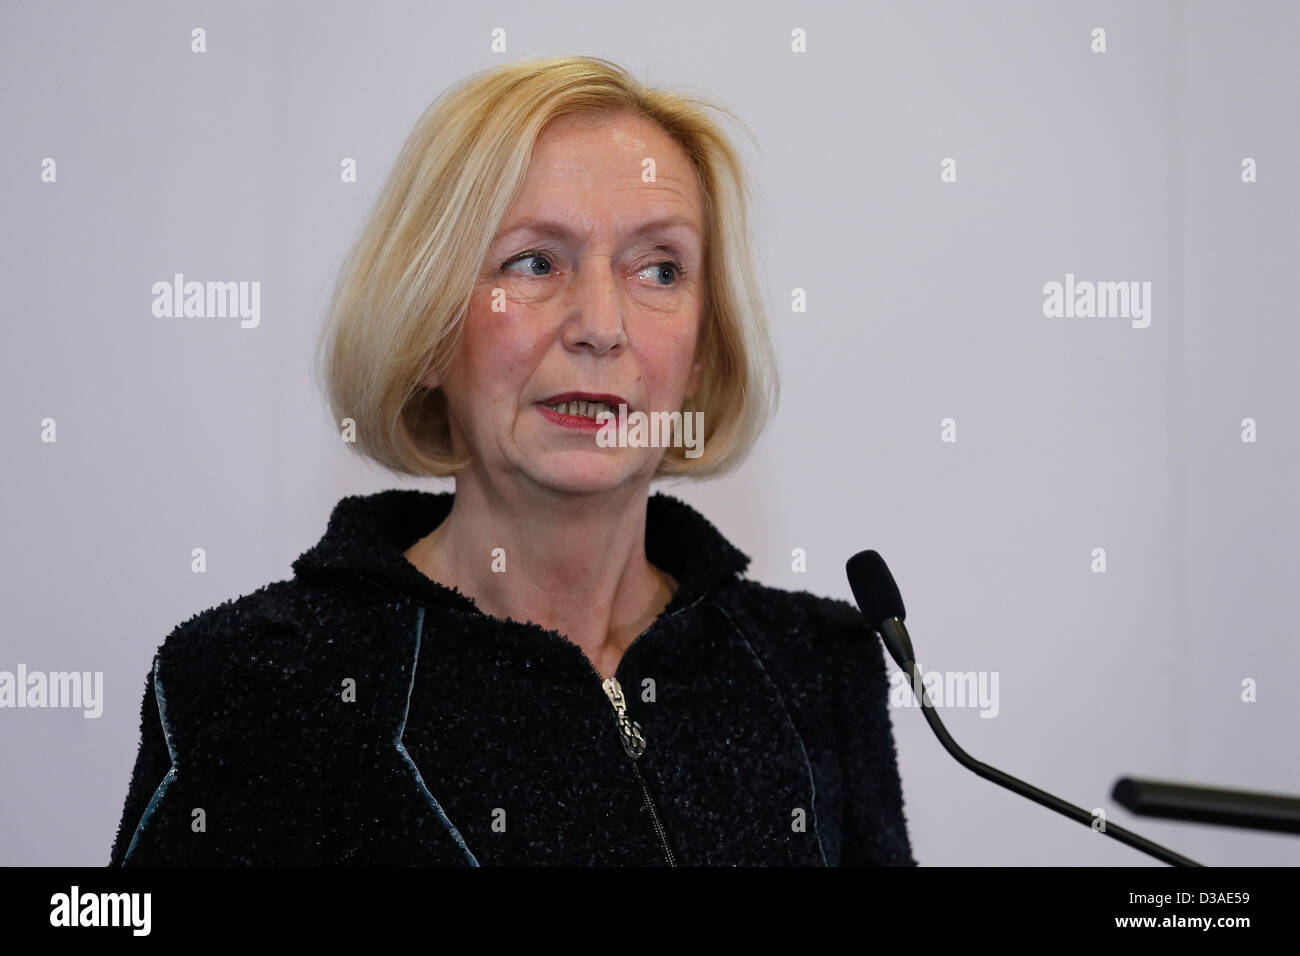 Berlin, Germany.  14th February, 2013. Statement of the New Federal Minister of Education and Research, Johanna Wanka at the Federal Ministry for Education and Research in Berlin. Credit:  Reynaldo Chaib Paganelli / Alamy Live News Stock Photo